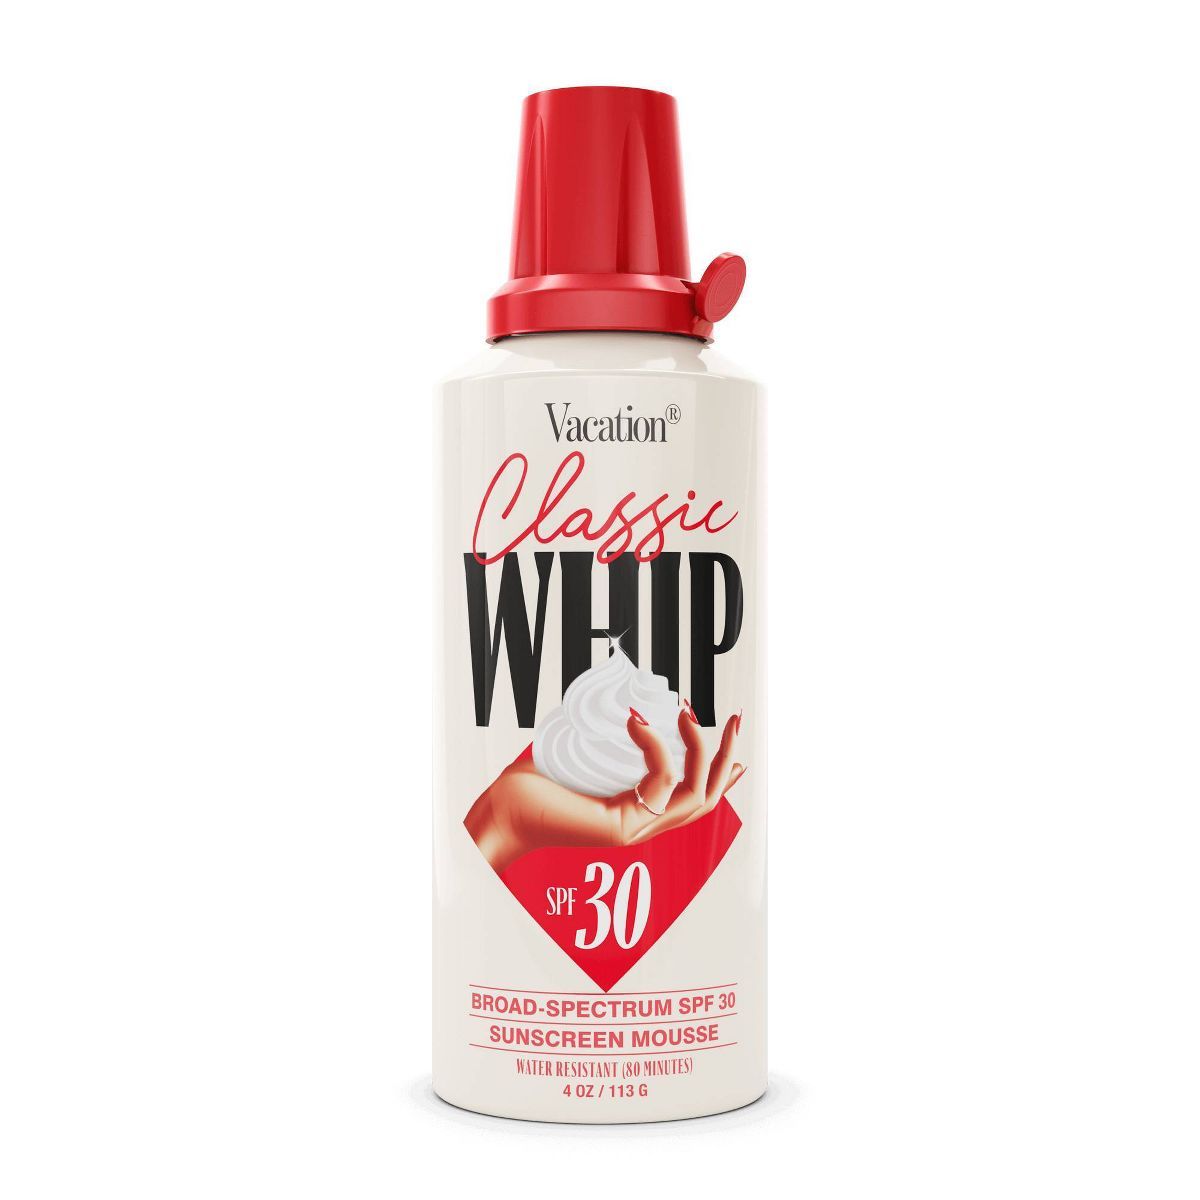 Vacation Sunscreen Classic Whip - SPF 30 - 4 fl oz | Target